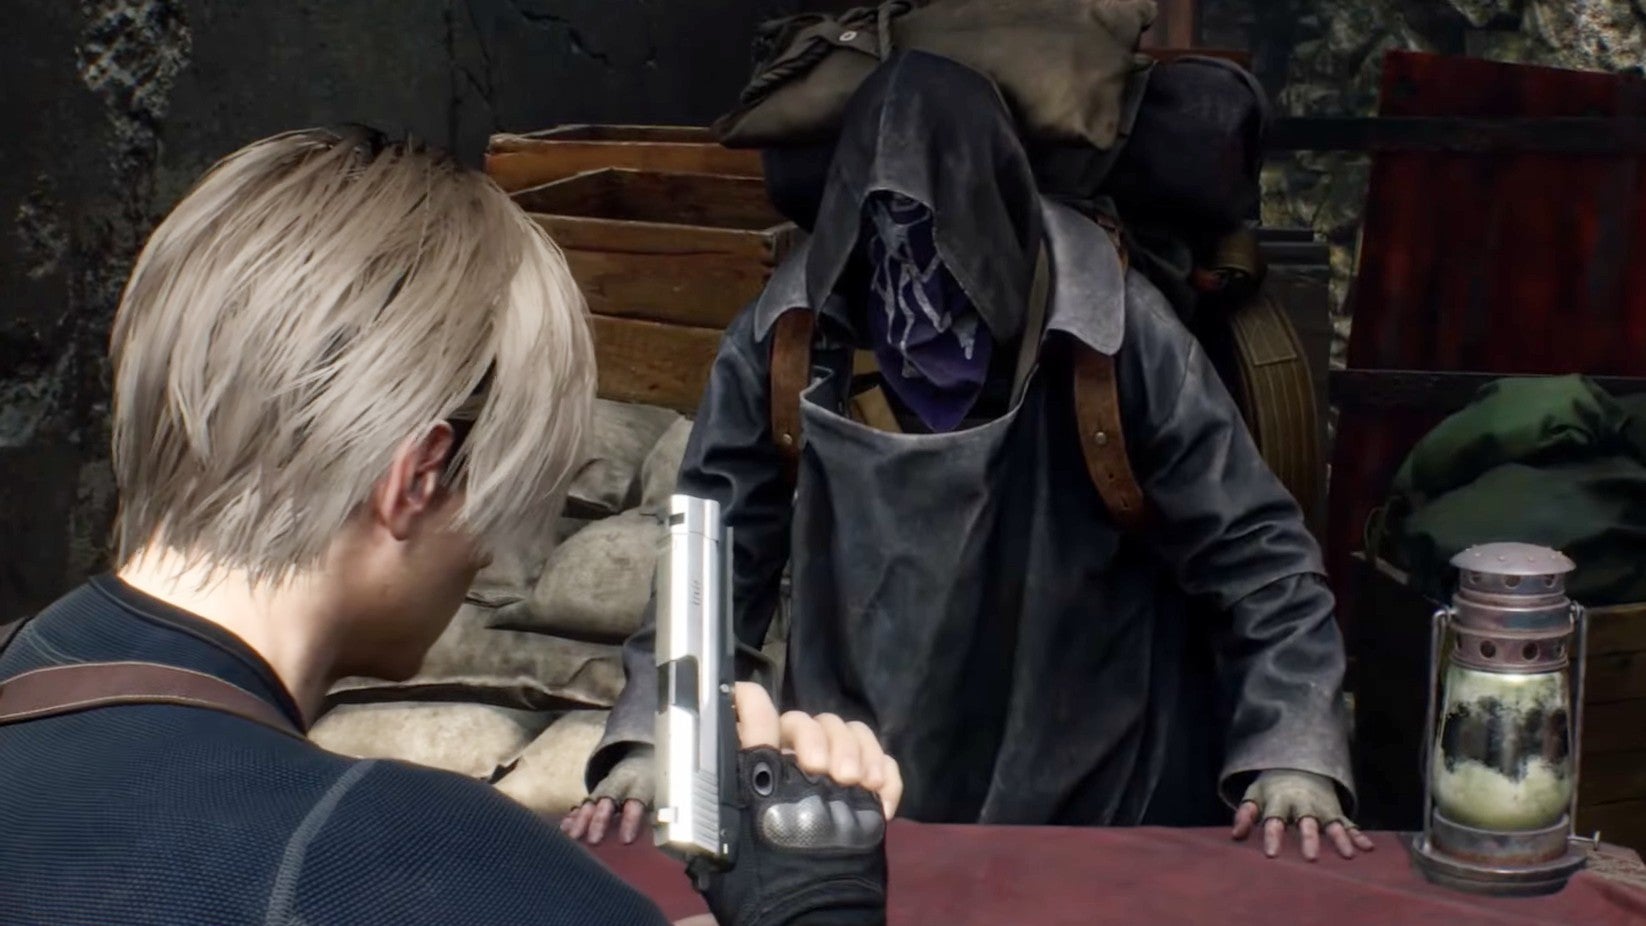 Resident Evil 4 Remake's merchant is hardier than he used to be - Eurogamer.net (Picture 4)